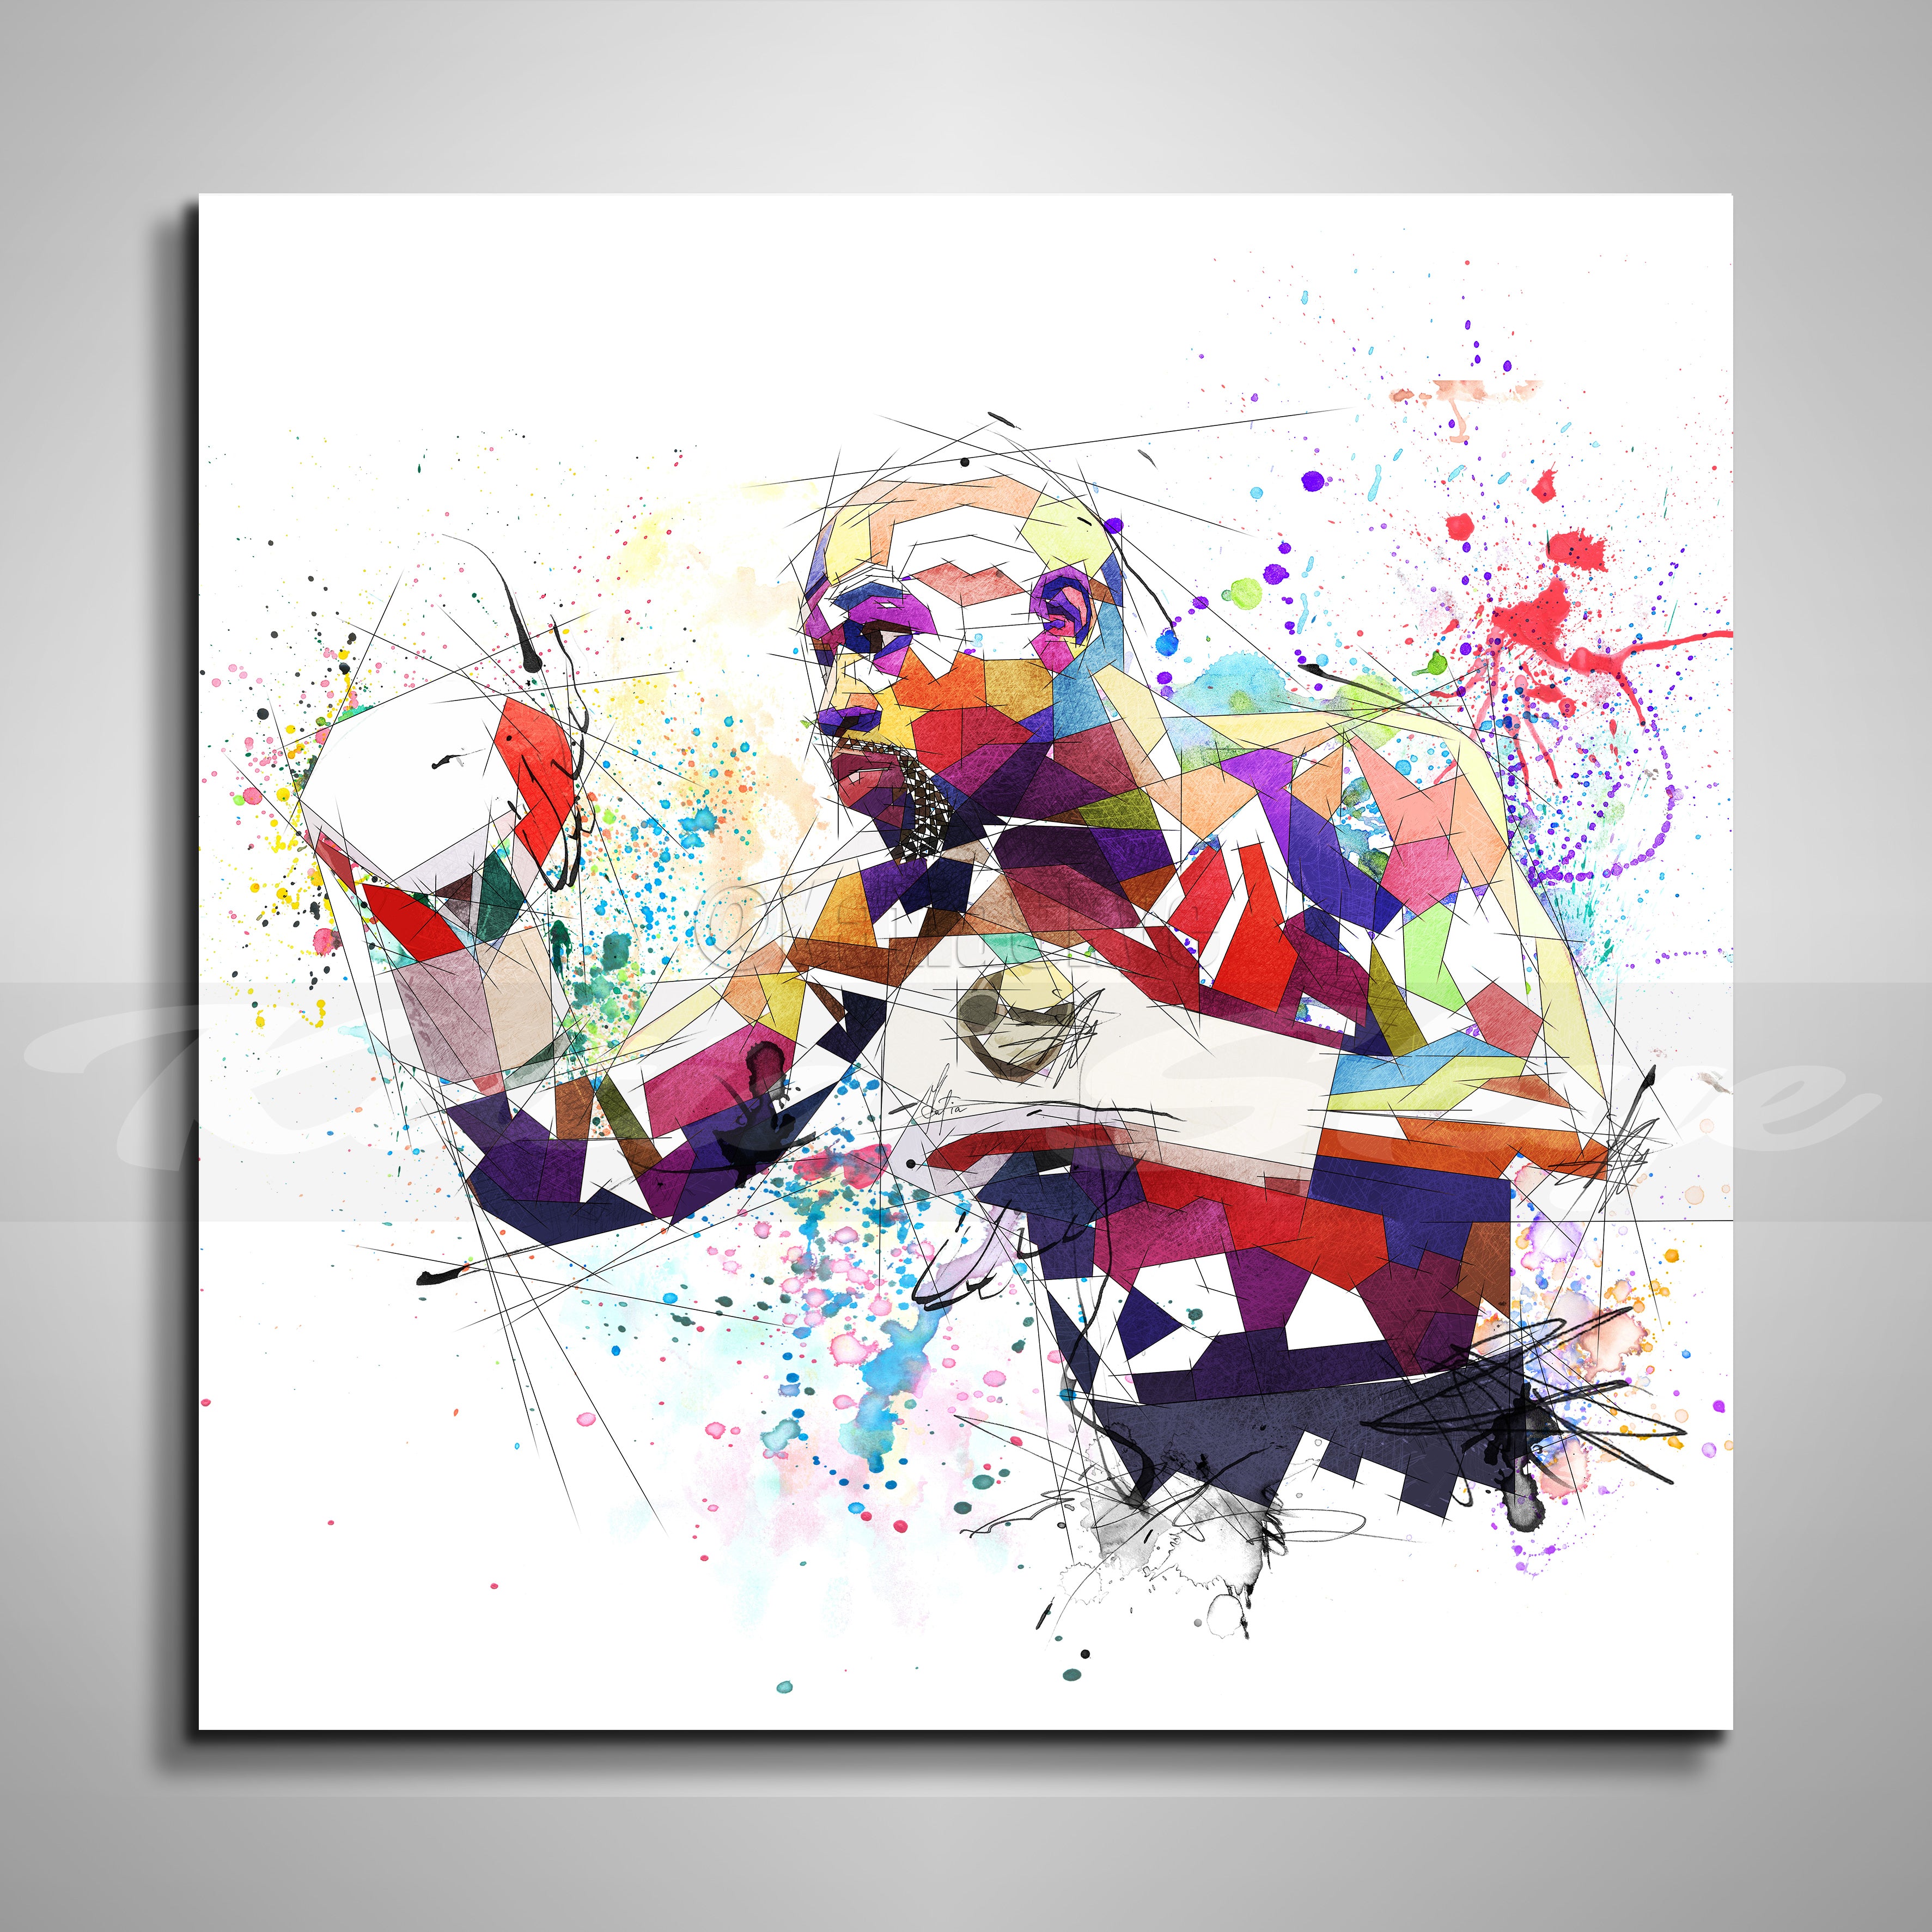 ABSTRACT MARTIAL ARTS WALL ART INSPIRED BY FLOYD MAYWEATHER // MMA-FM01